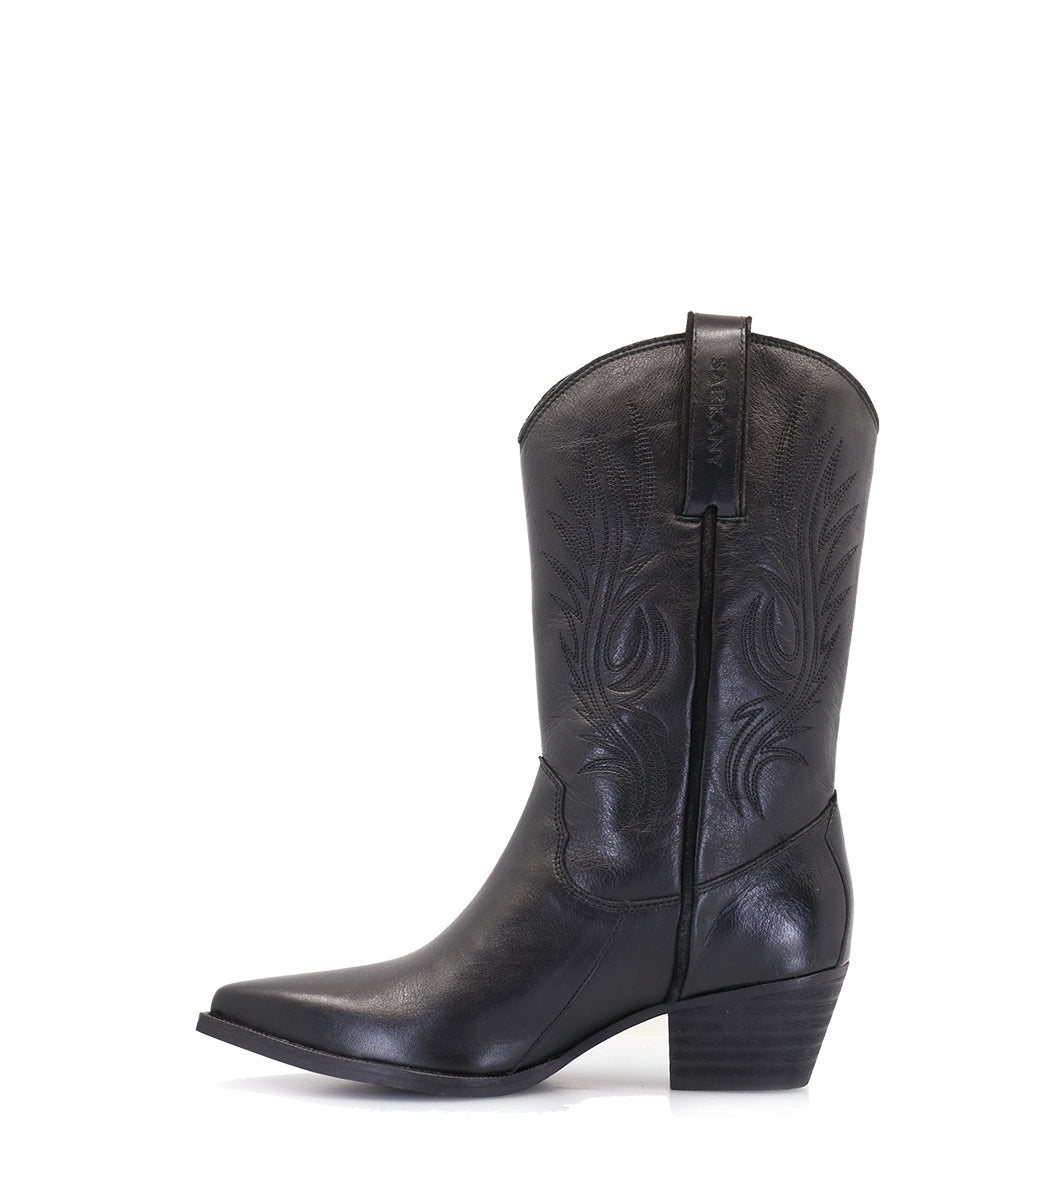 FRANT BLACK WESTERN BOOTS